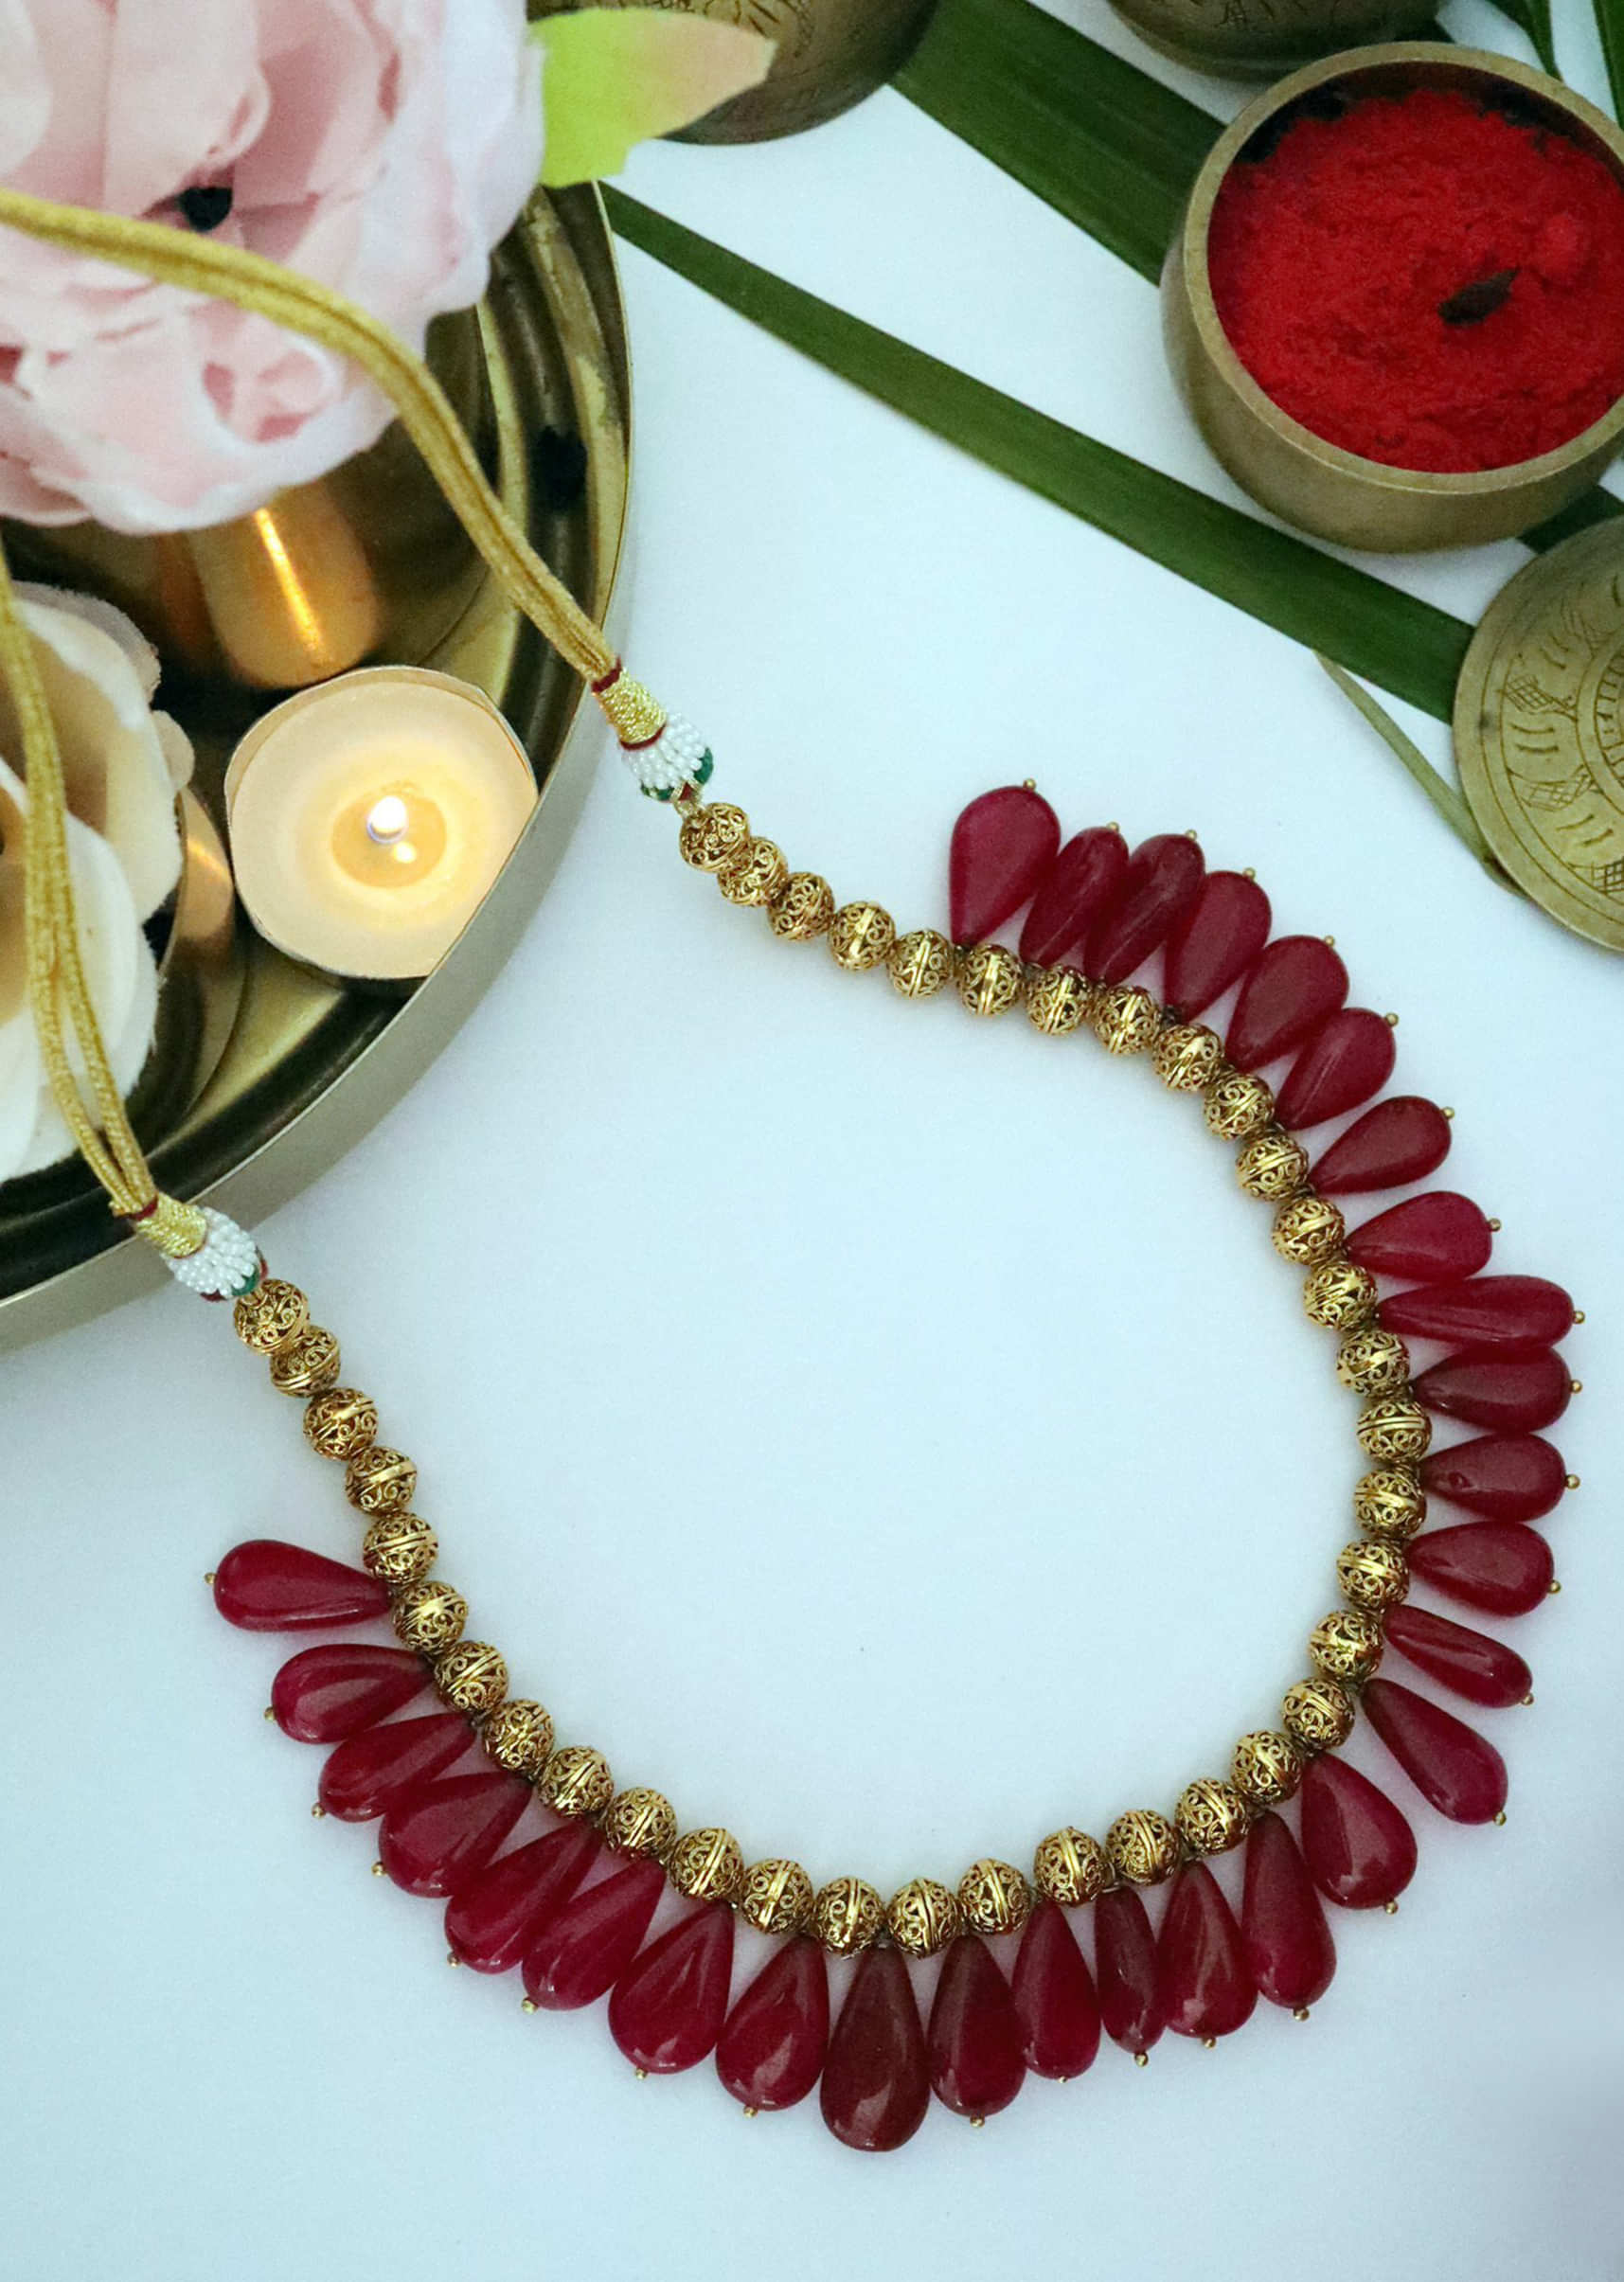 Red Necklace With Embossed Gold Beads And Dangling Red Stones By Paisley Pop